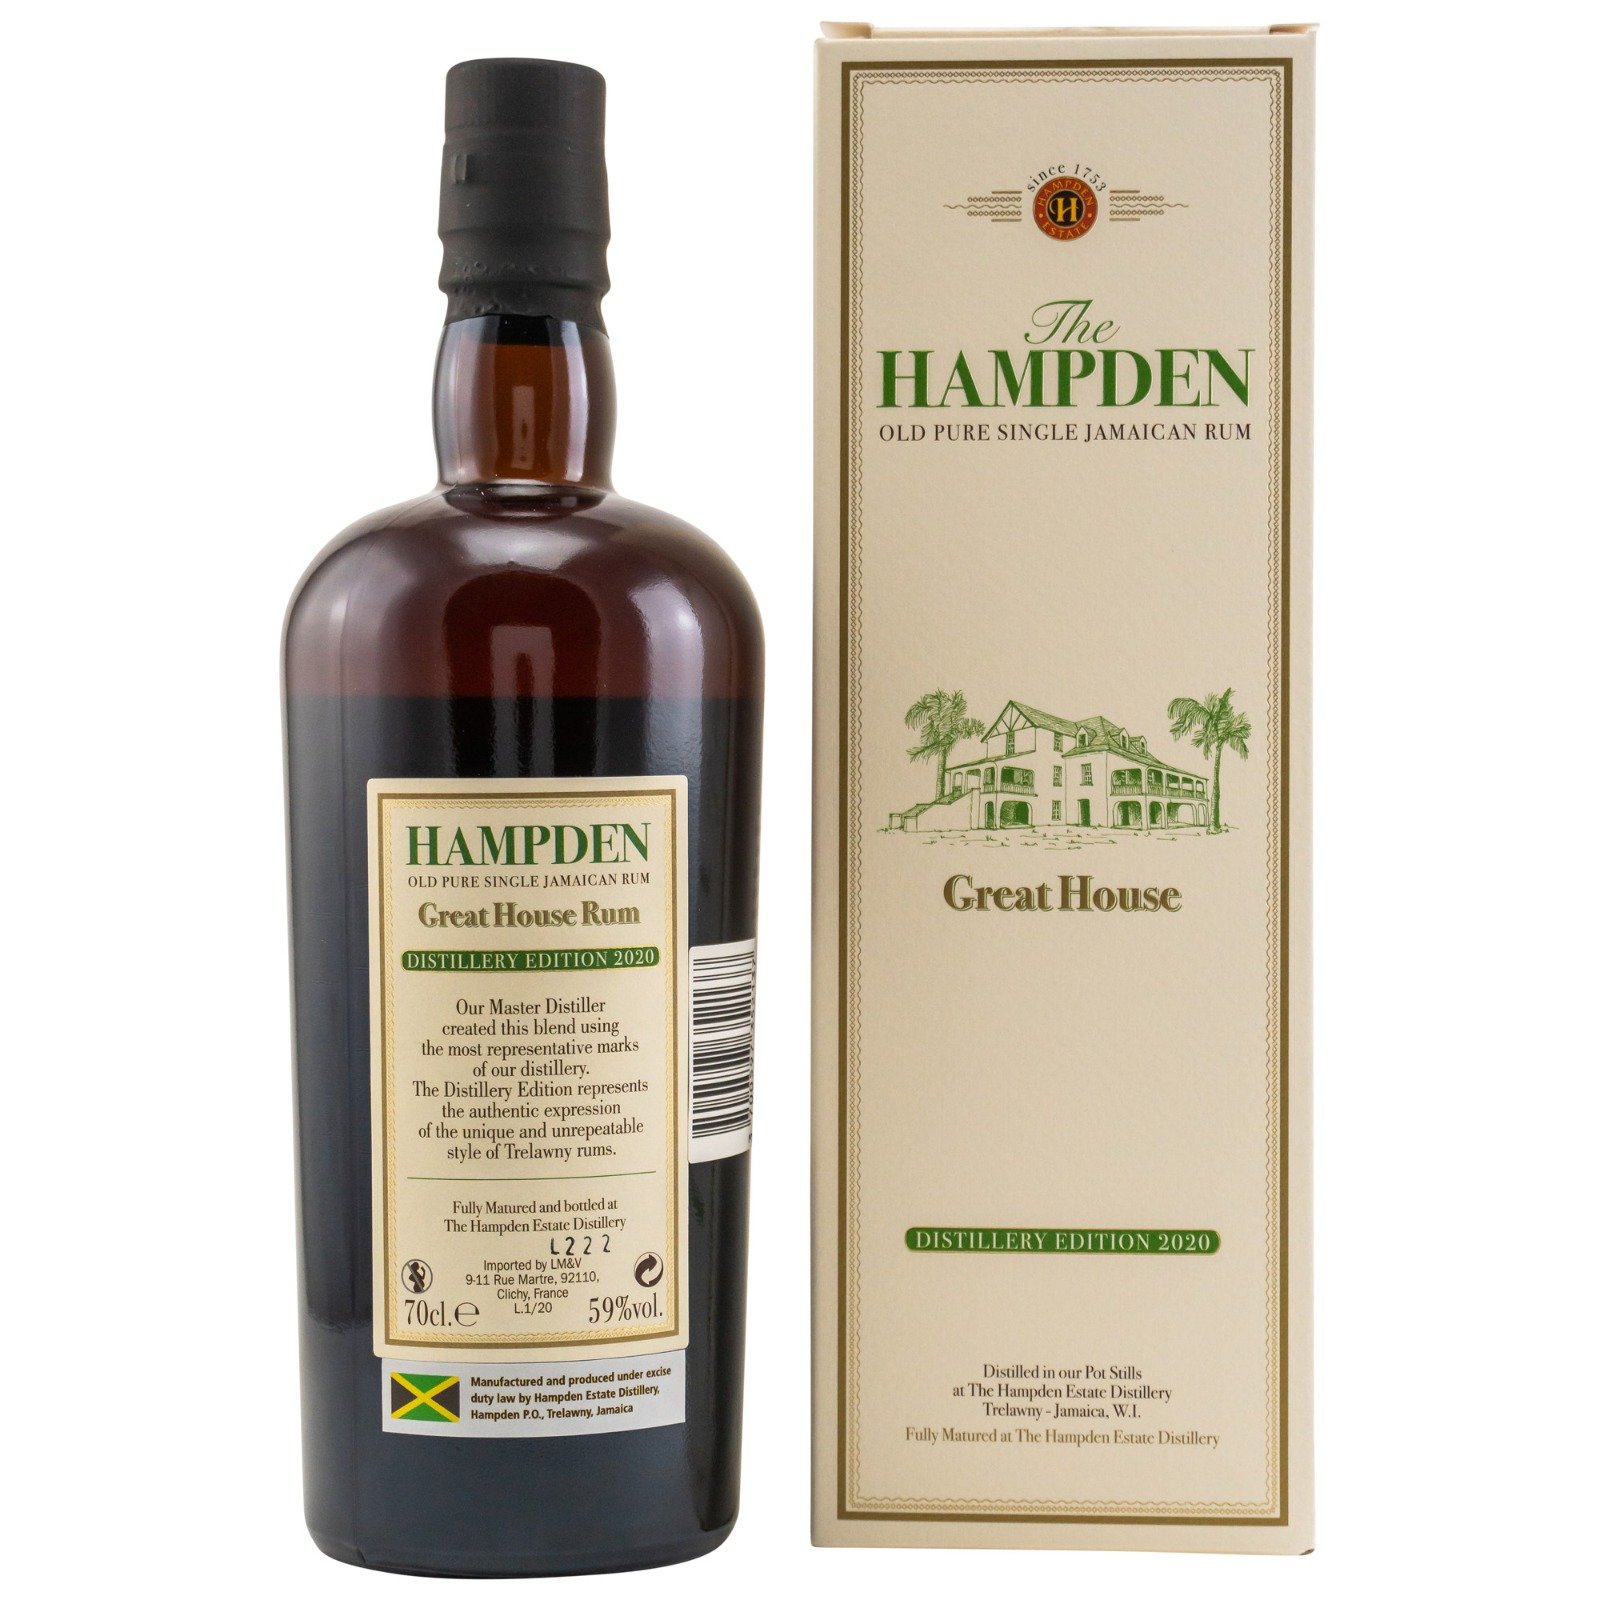 The Hampden Great House Distillery Edition 2020 Old Pure Single Jamaican Rum